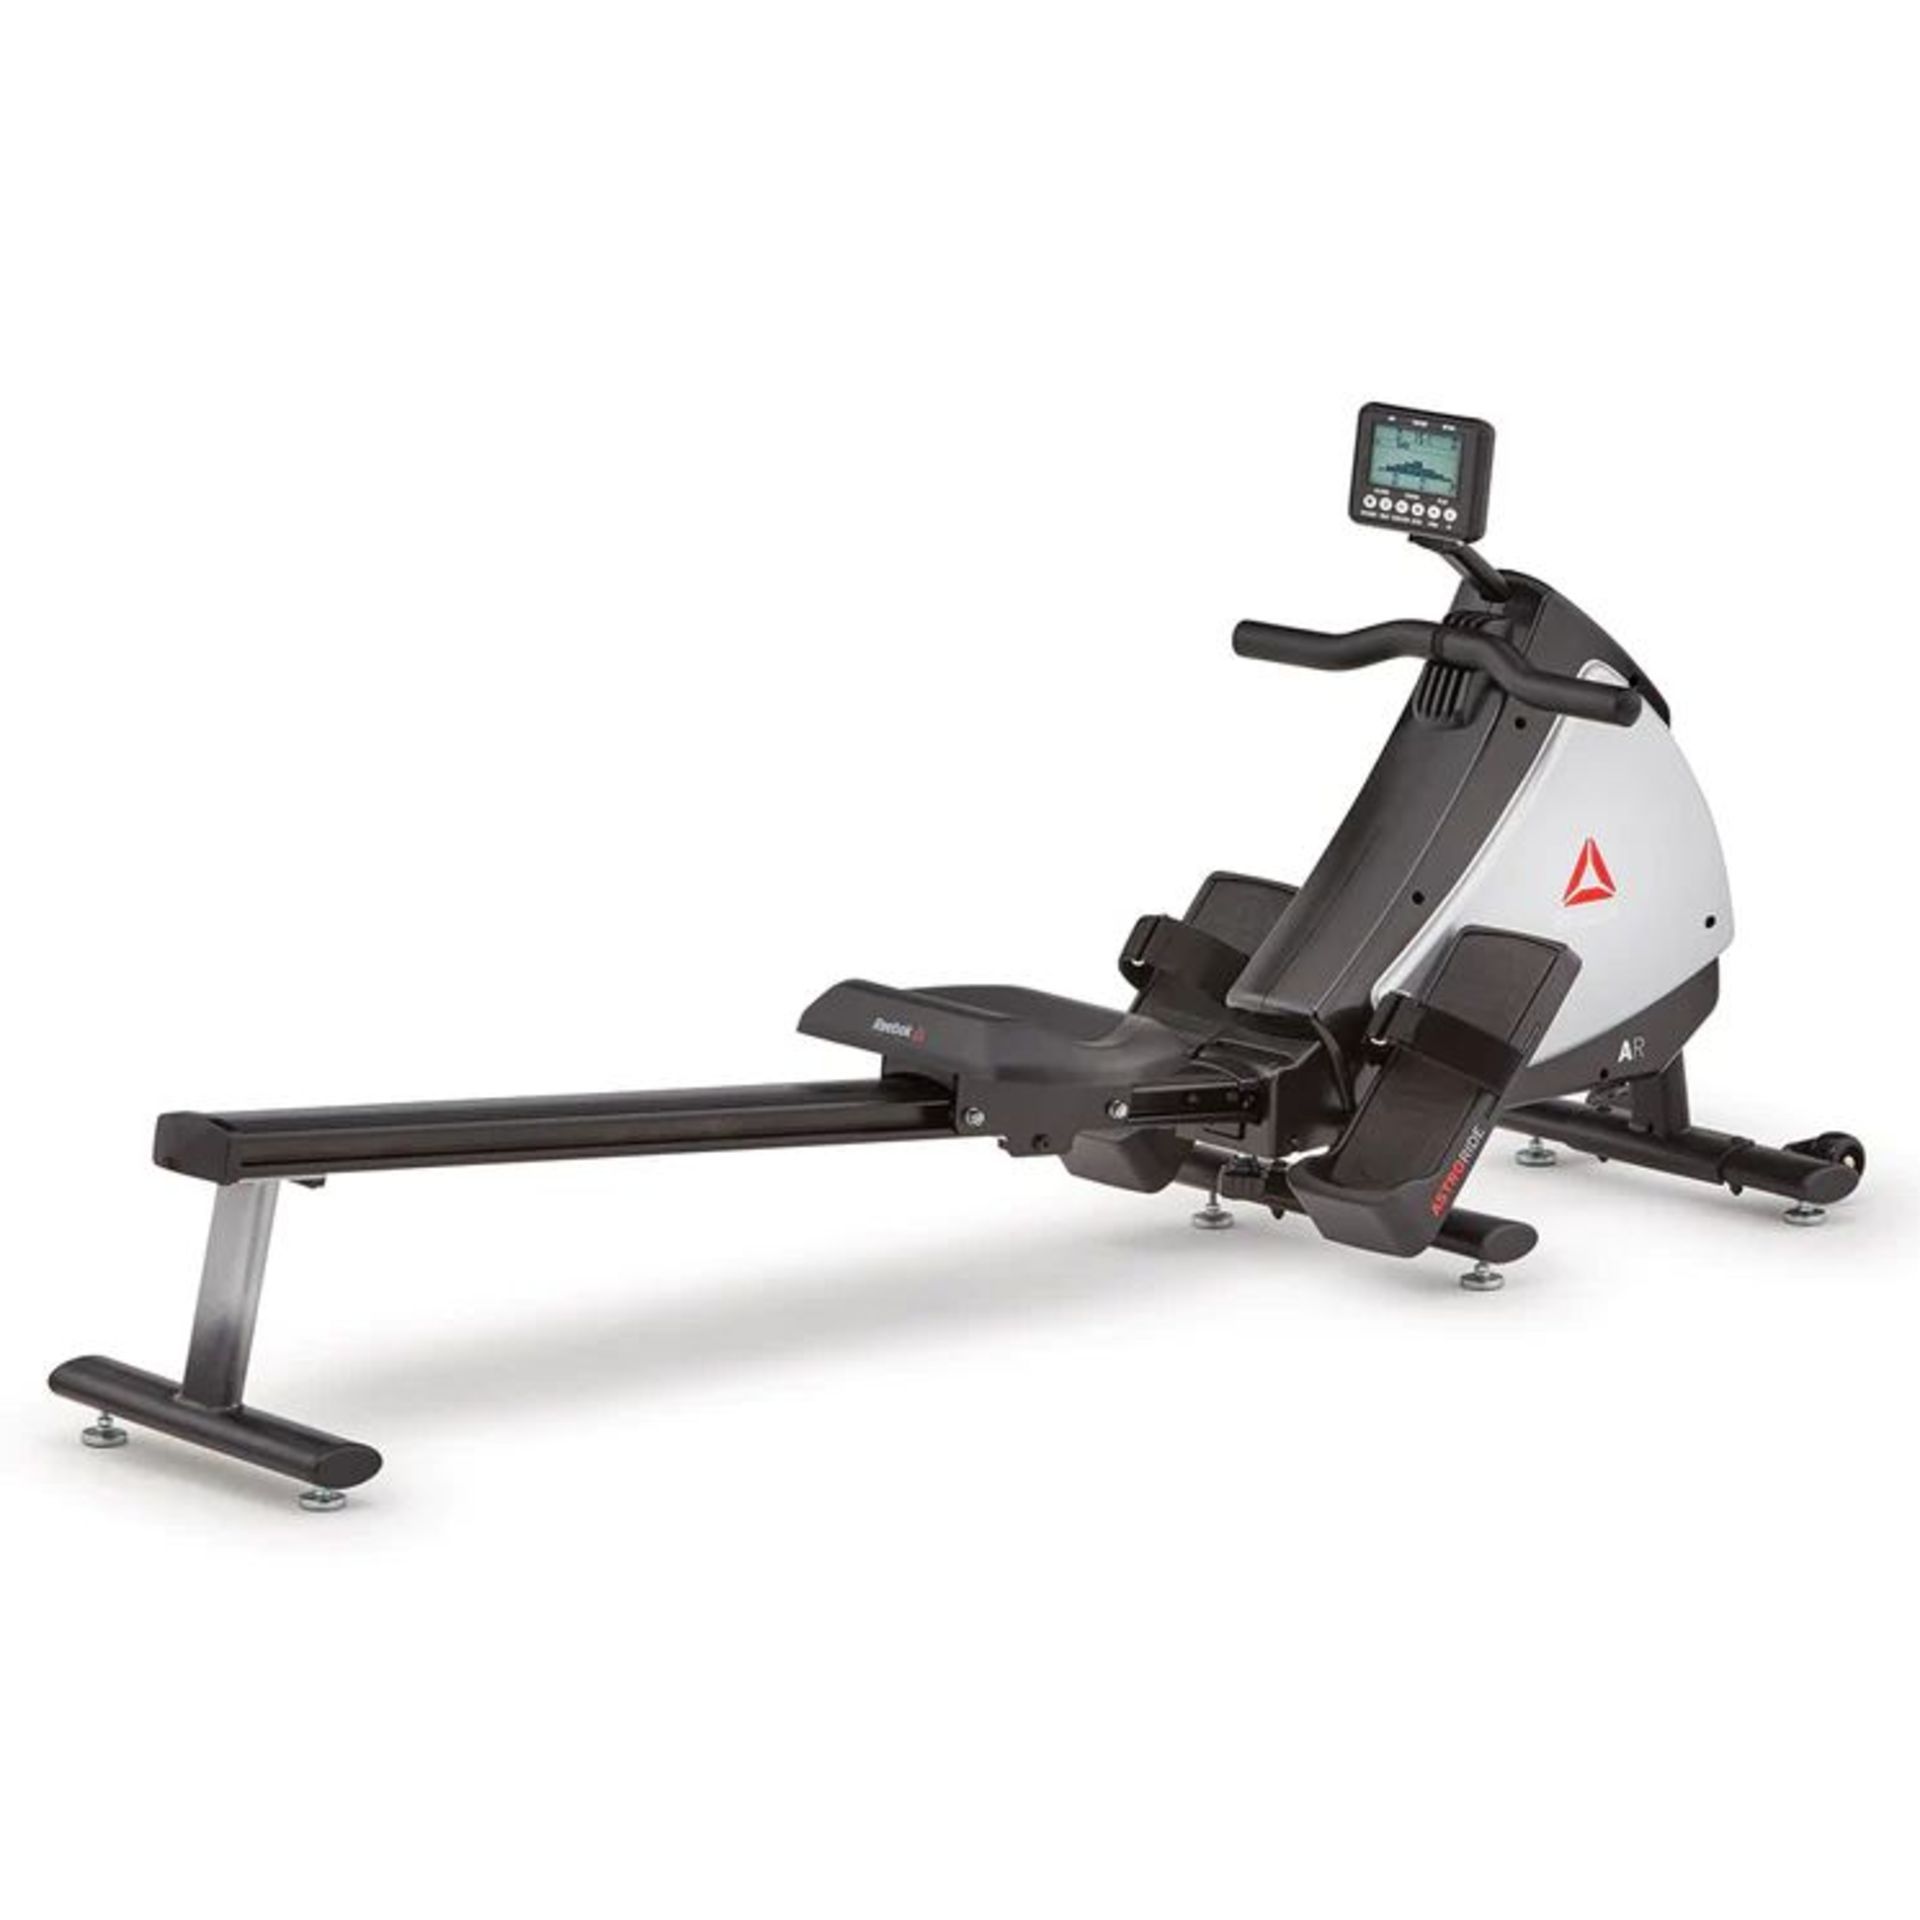 BRAND NEW REEBOK AR Rower. RRP £514.99 EACH R9-8. Designed for you to create more effective and - Image 3 of 4